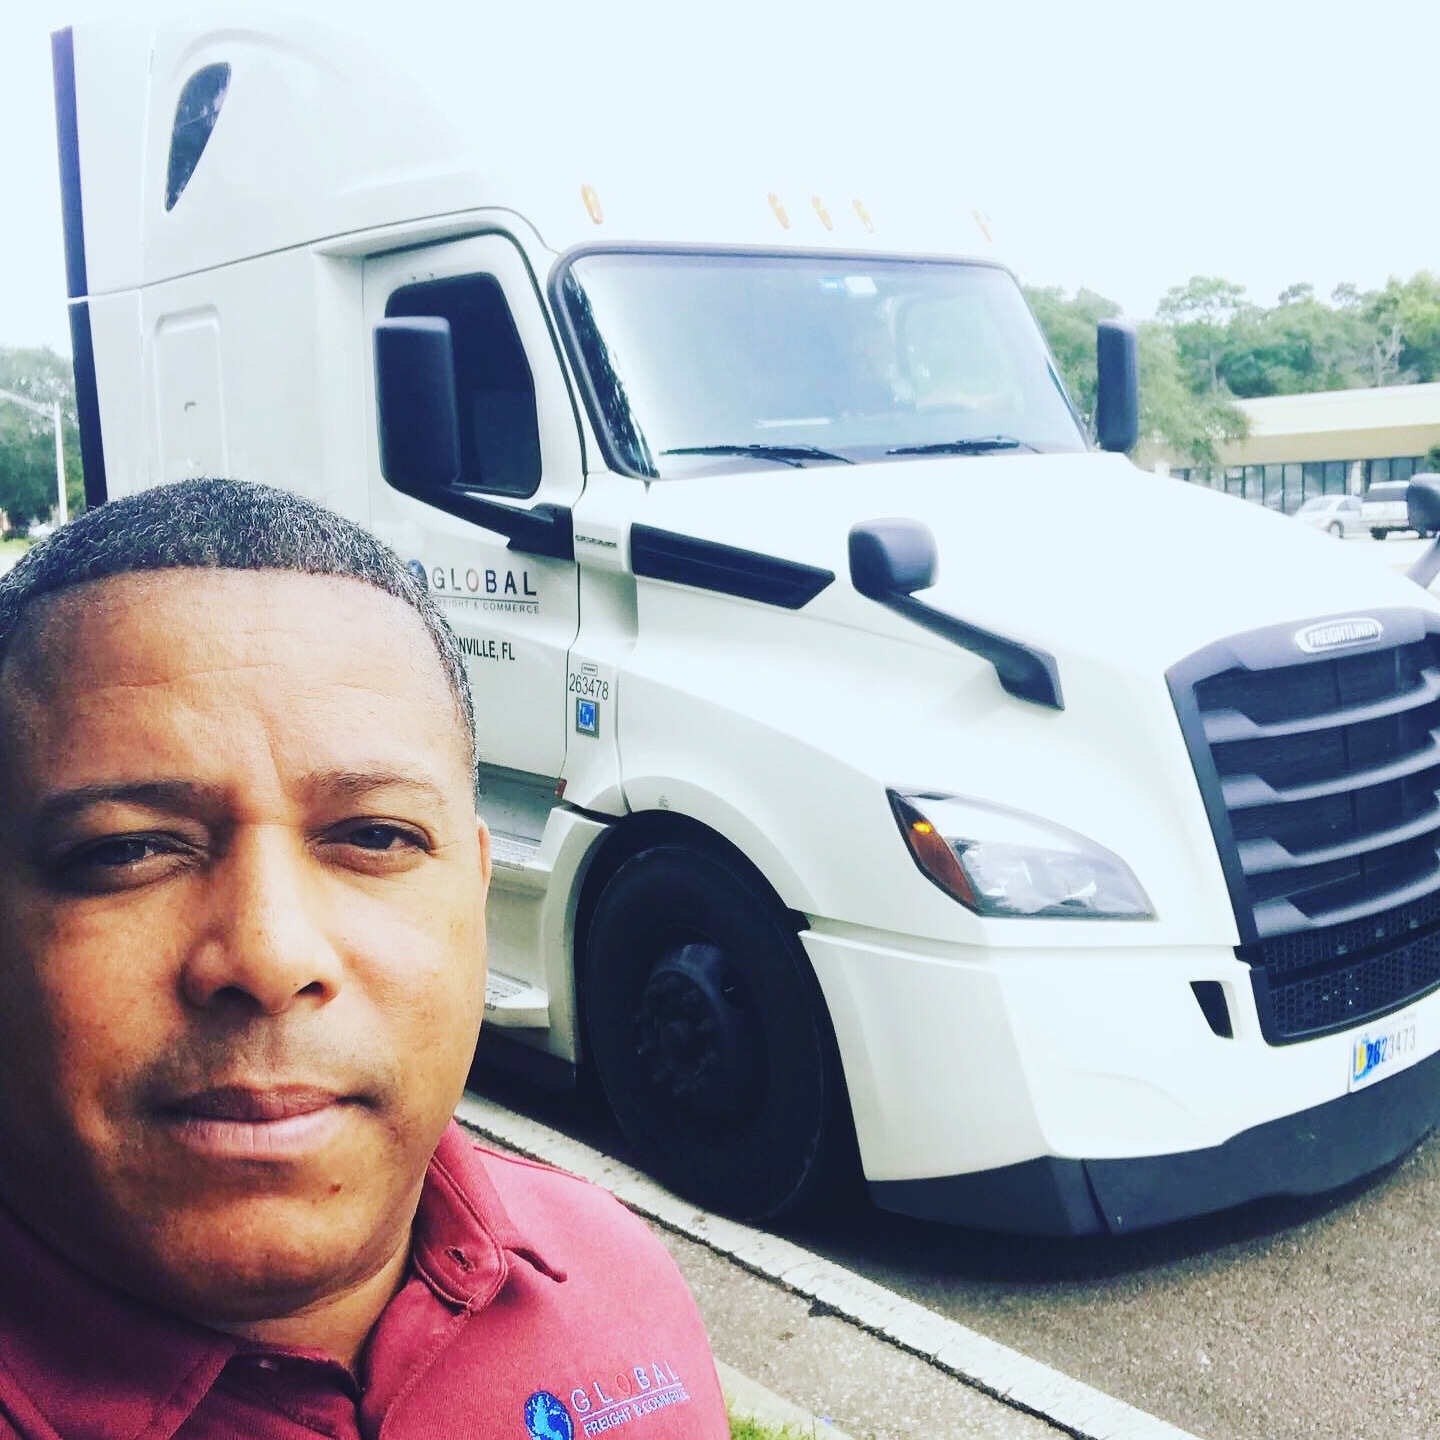 Jesus Garay started Global Freight & Commerce in 2014 after retiring from the U.S. Army.